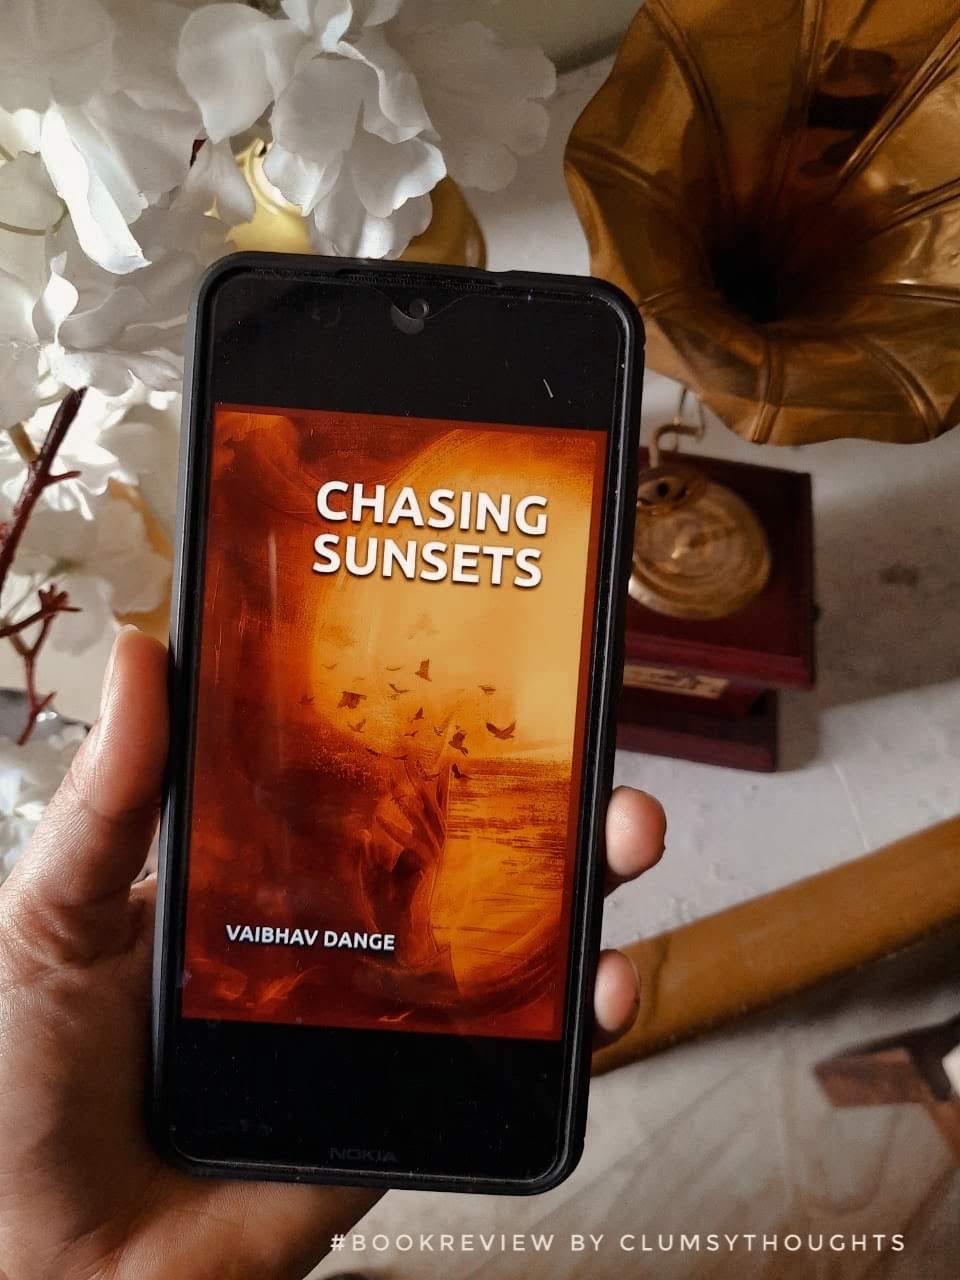 Chasing Sunsets by Vaibhav Dange #Bookreview